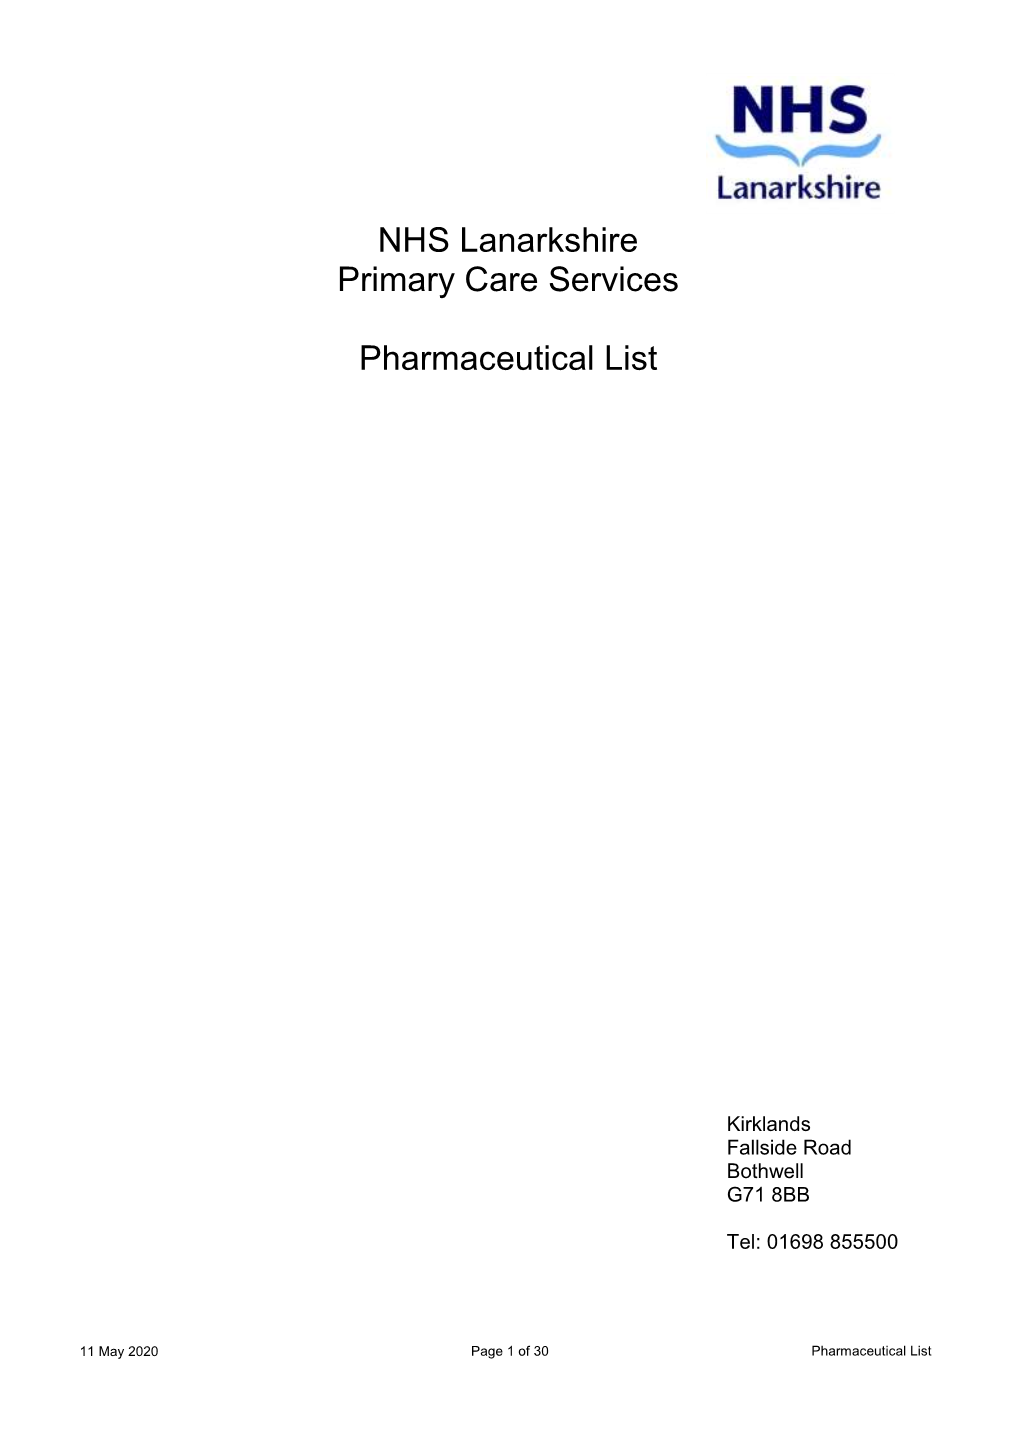 Pharmaceutical List May 2020